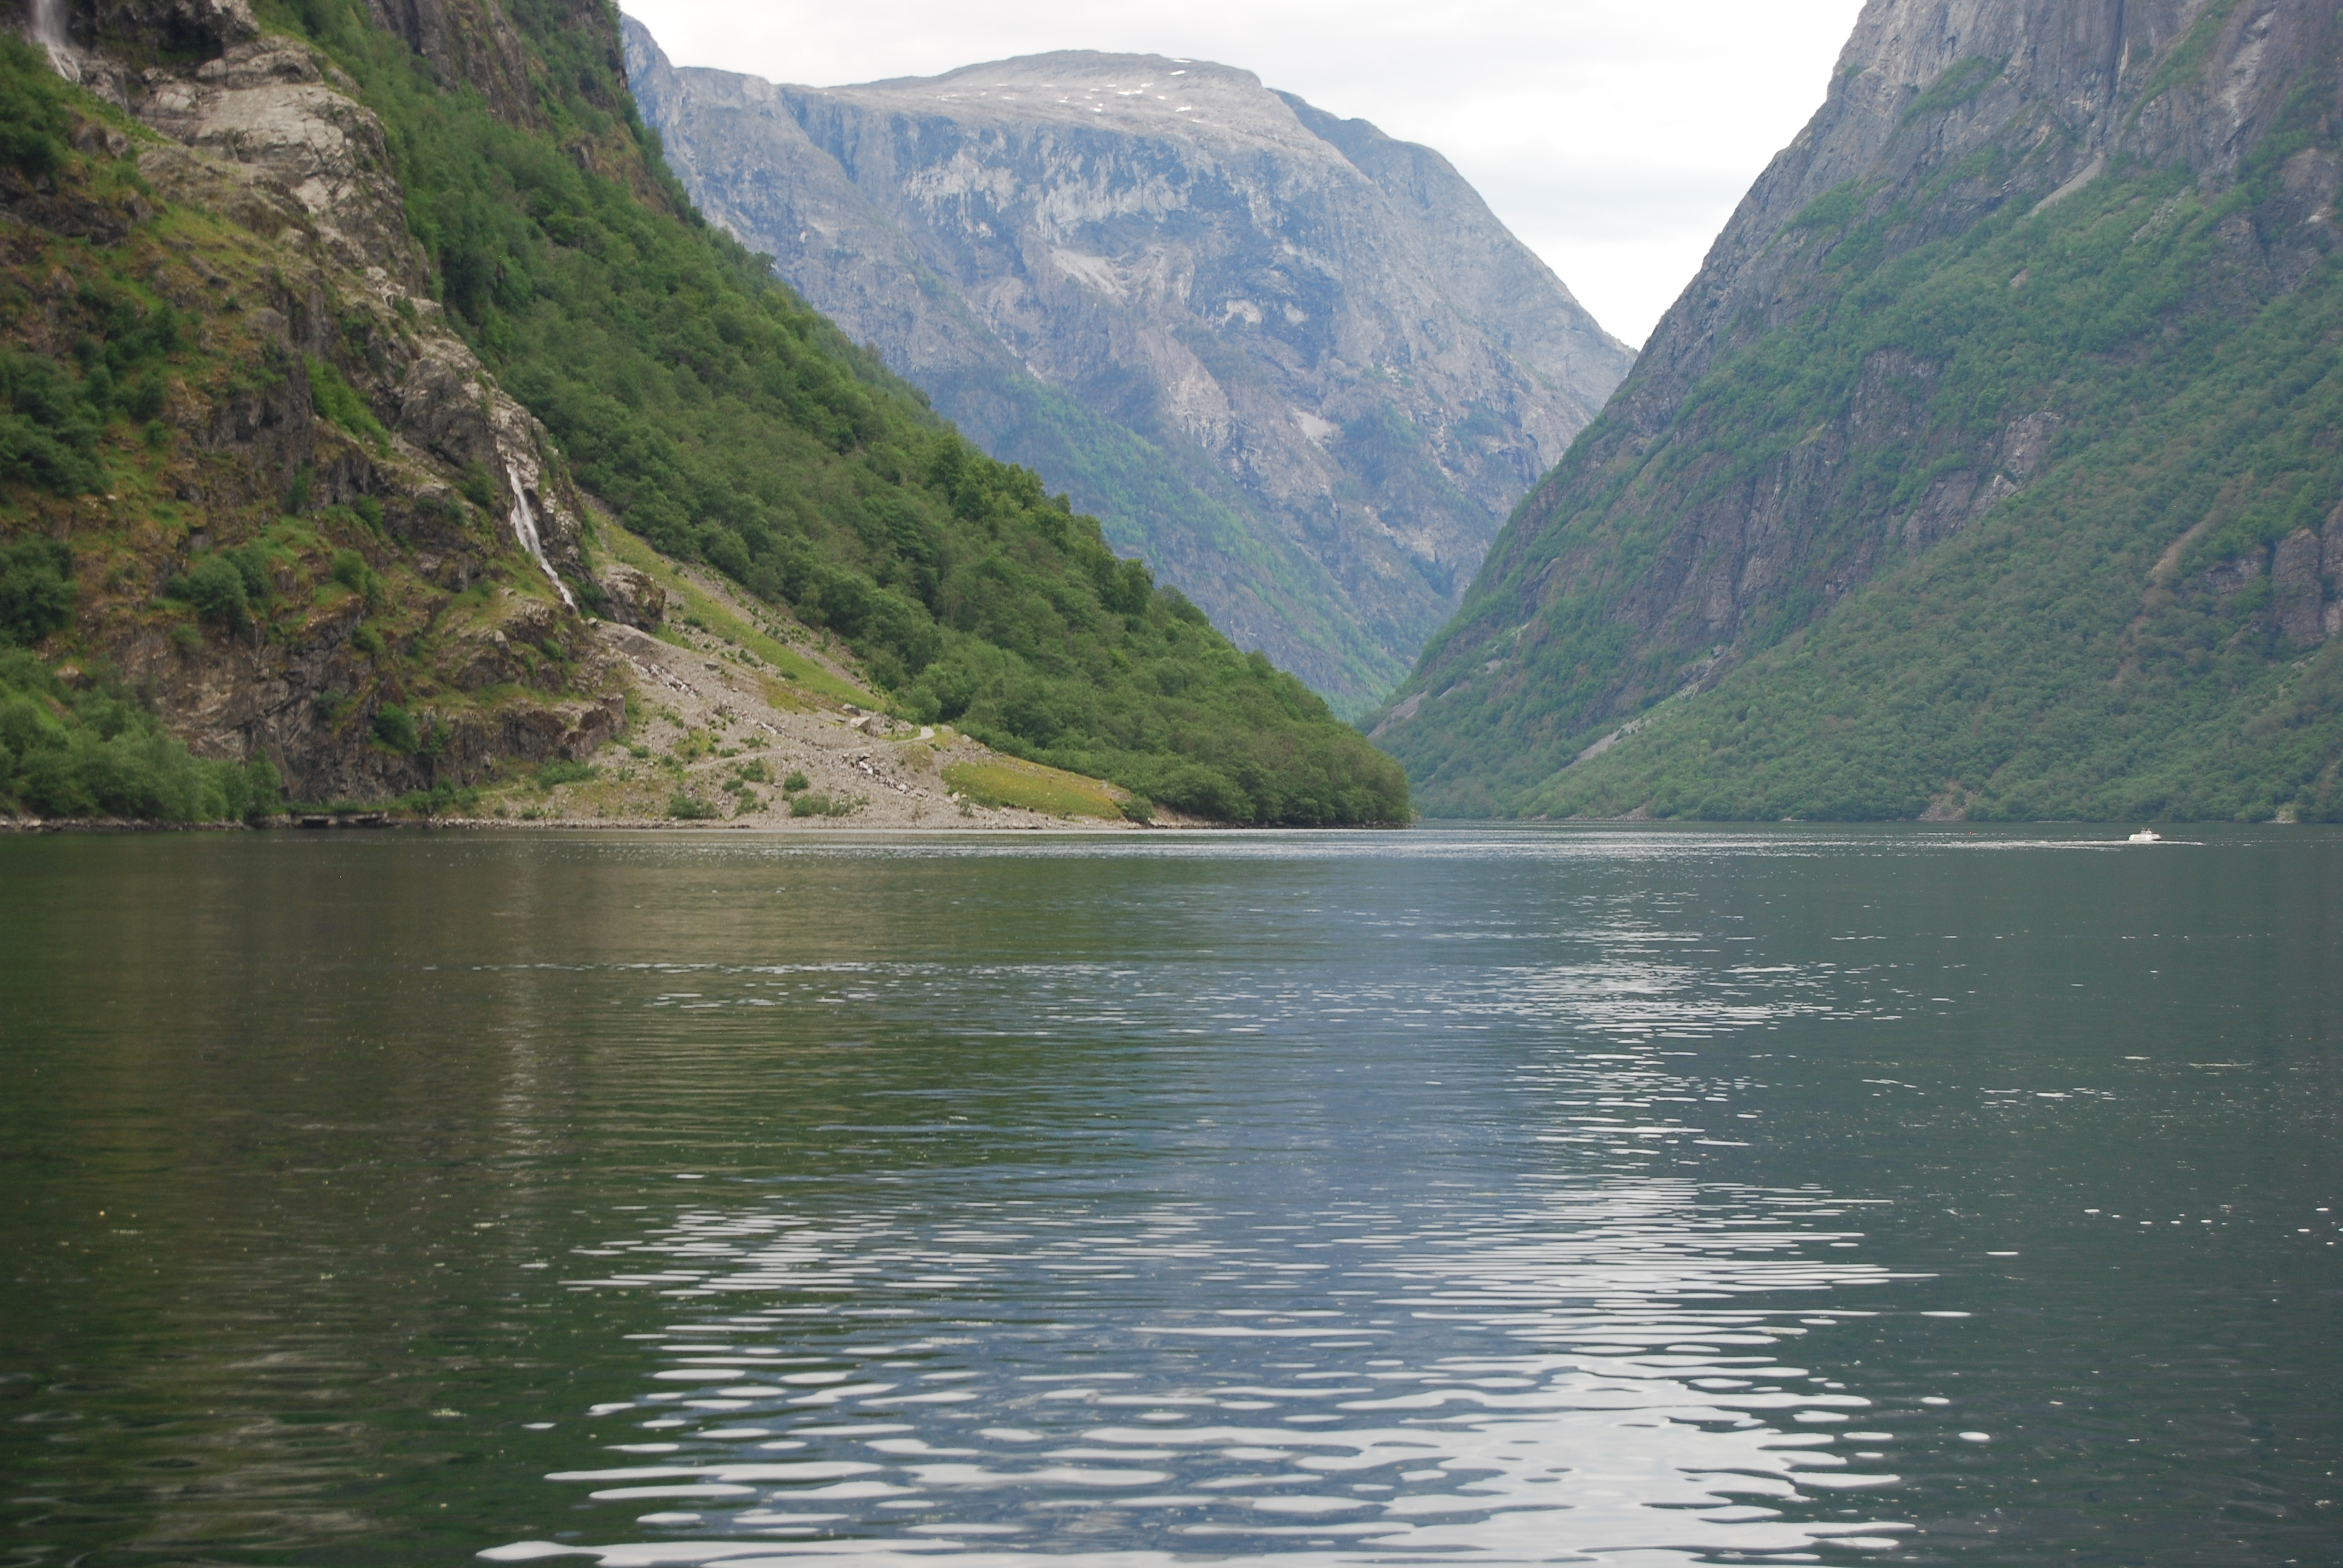 A fjord.